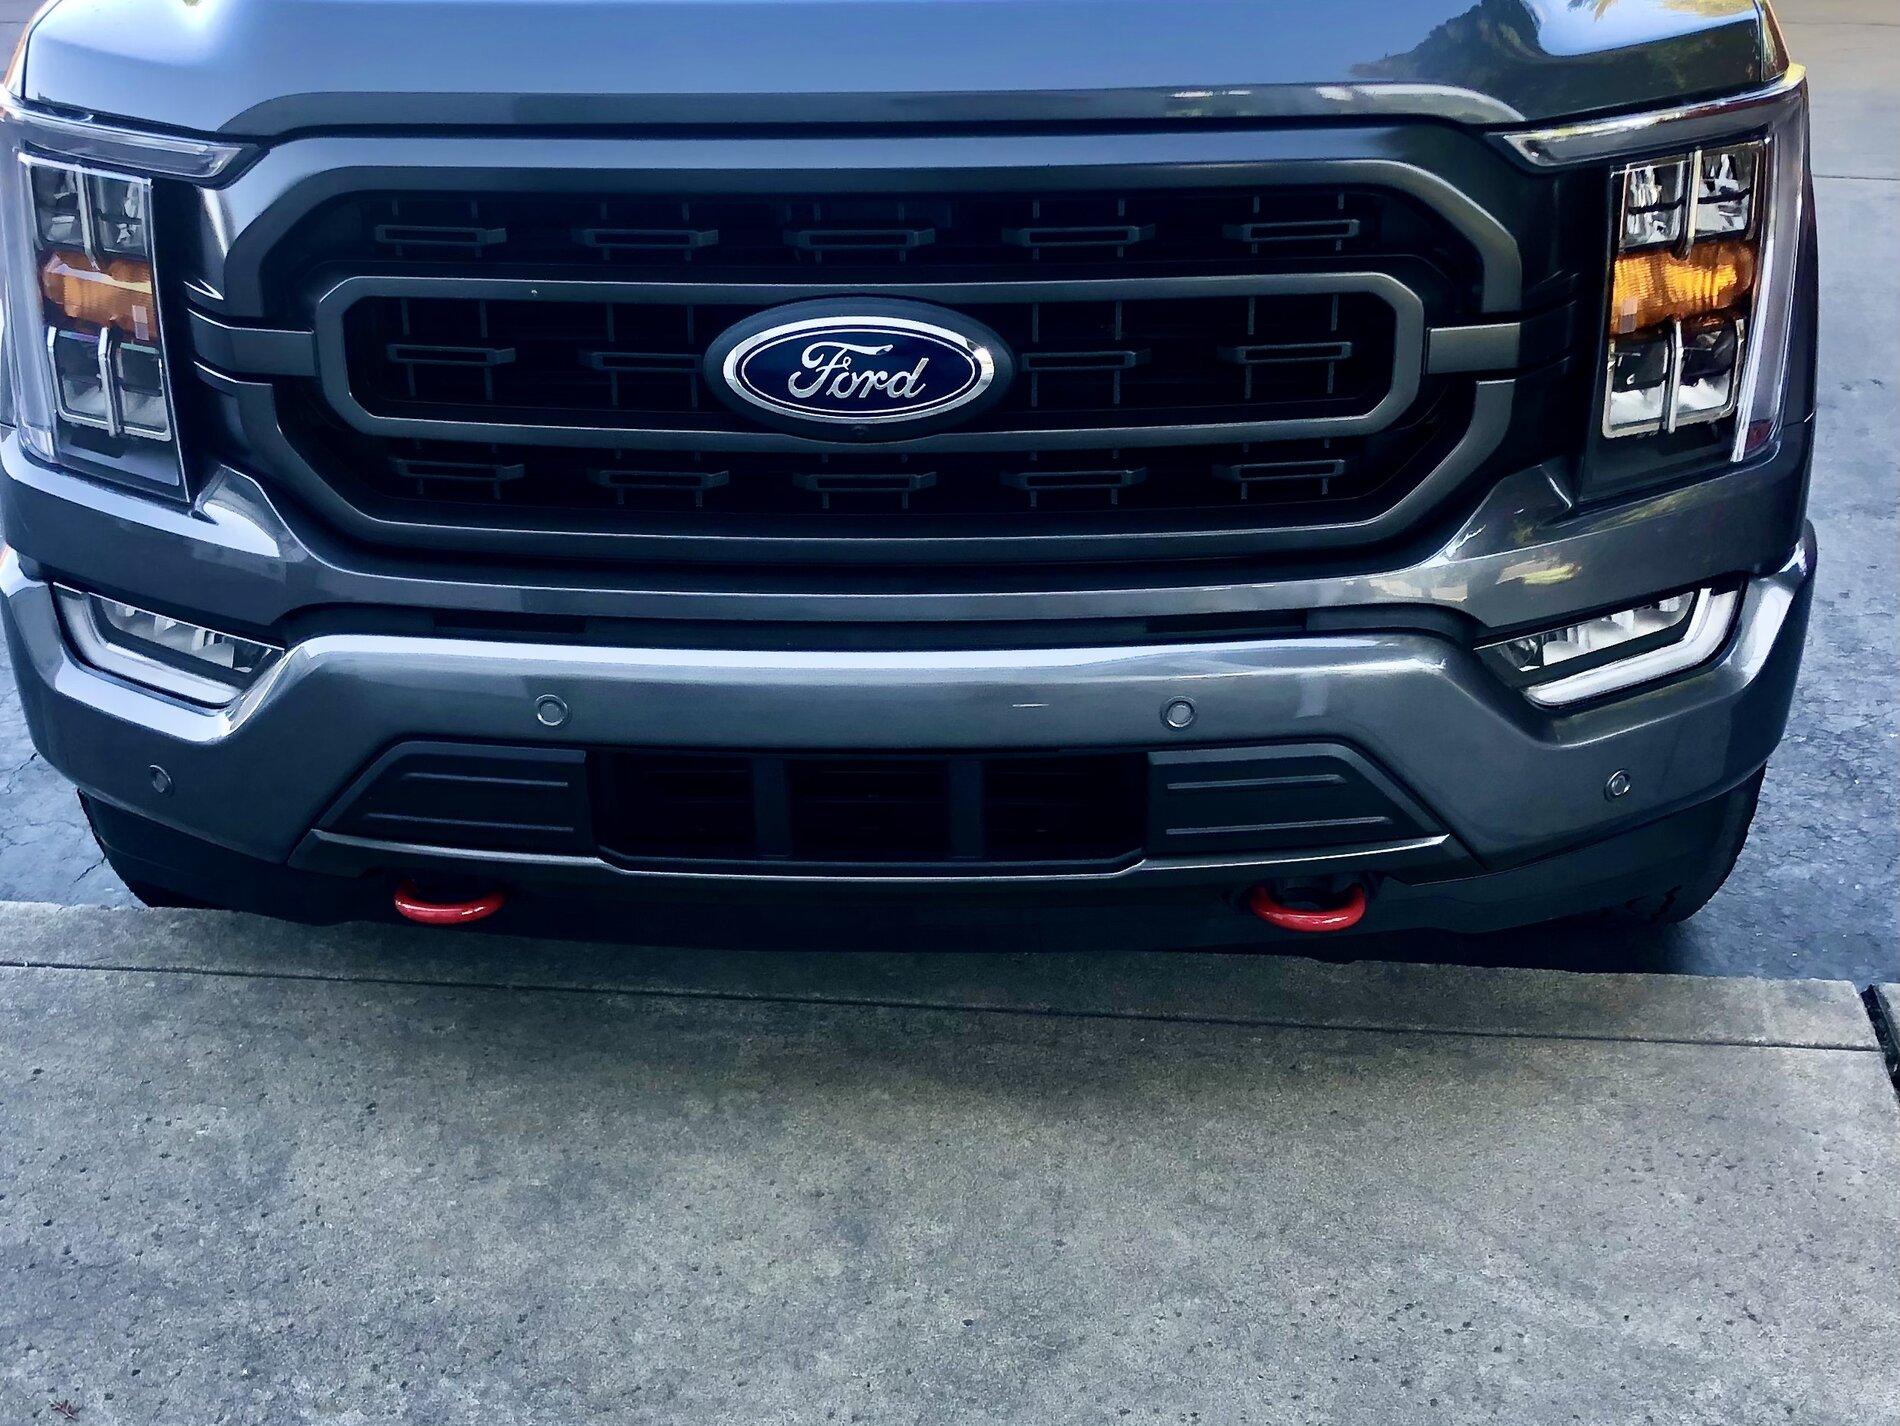 F150 Closed Front Tow Mount Points - Proper Usage - Ford F150